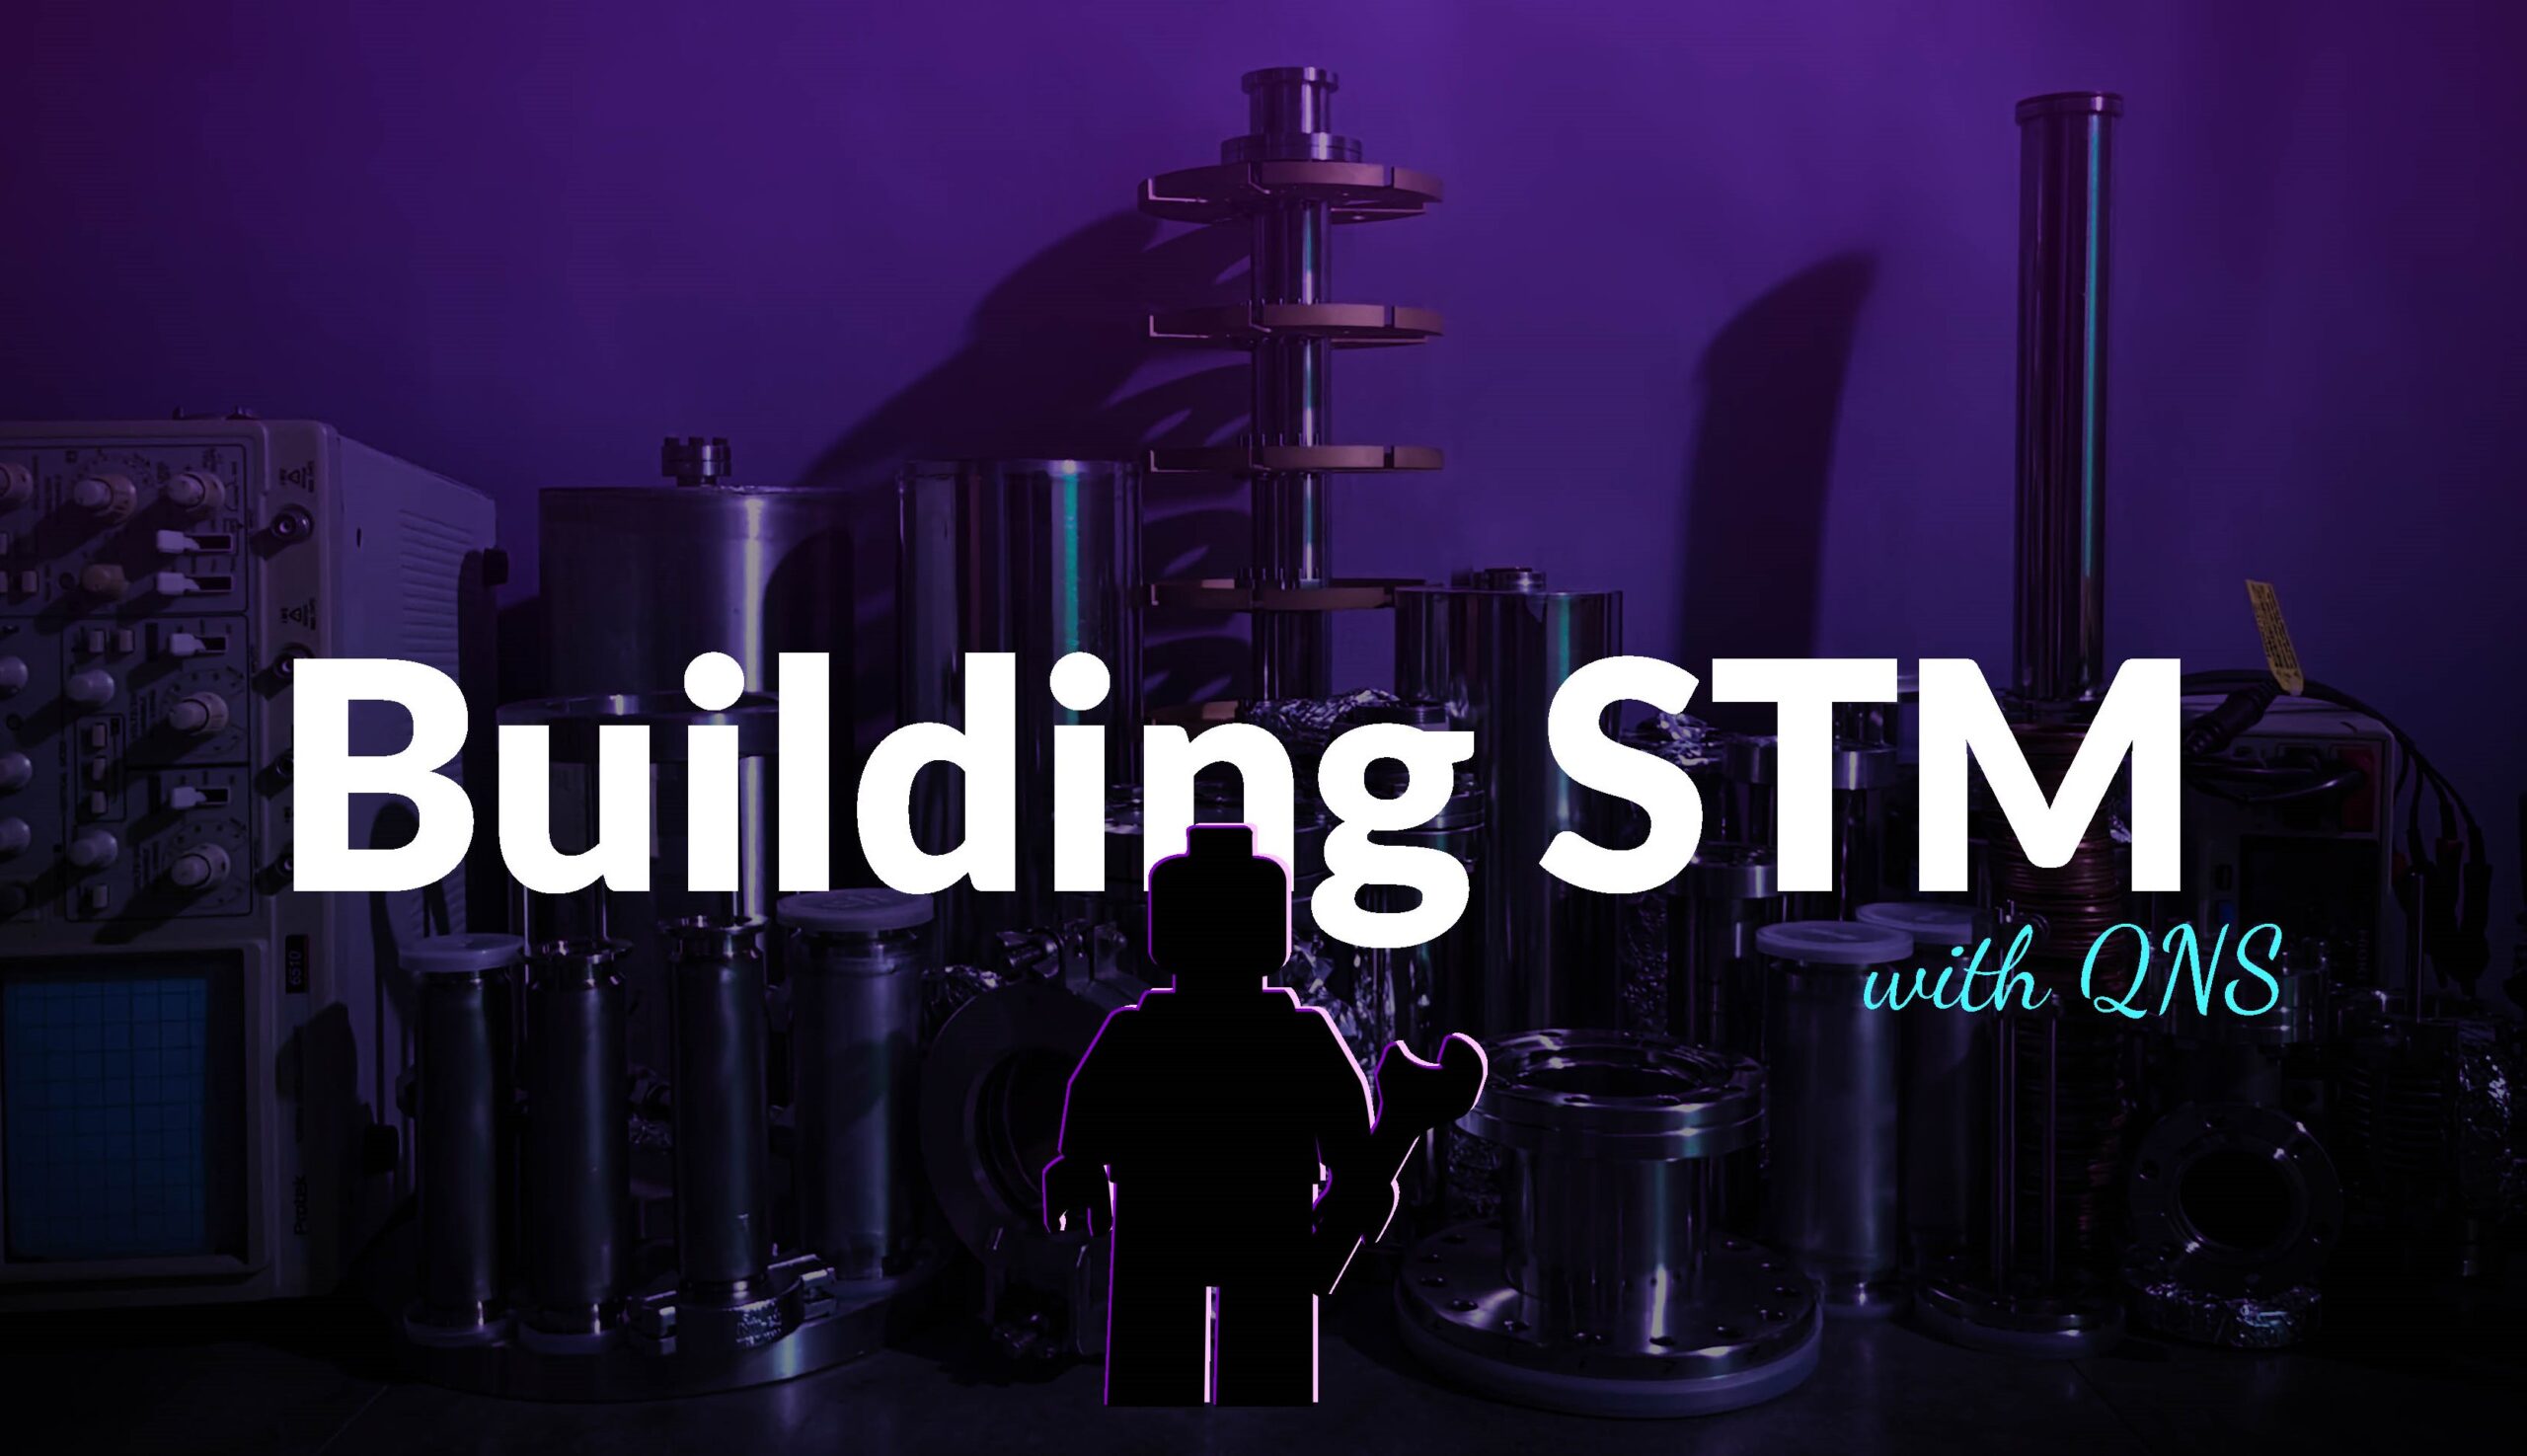 Lego Project "Building STM with QNS"